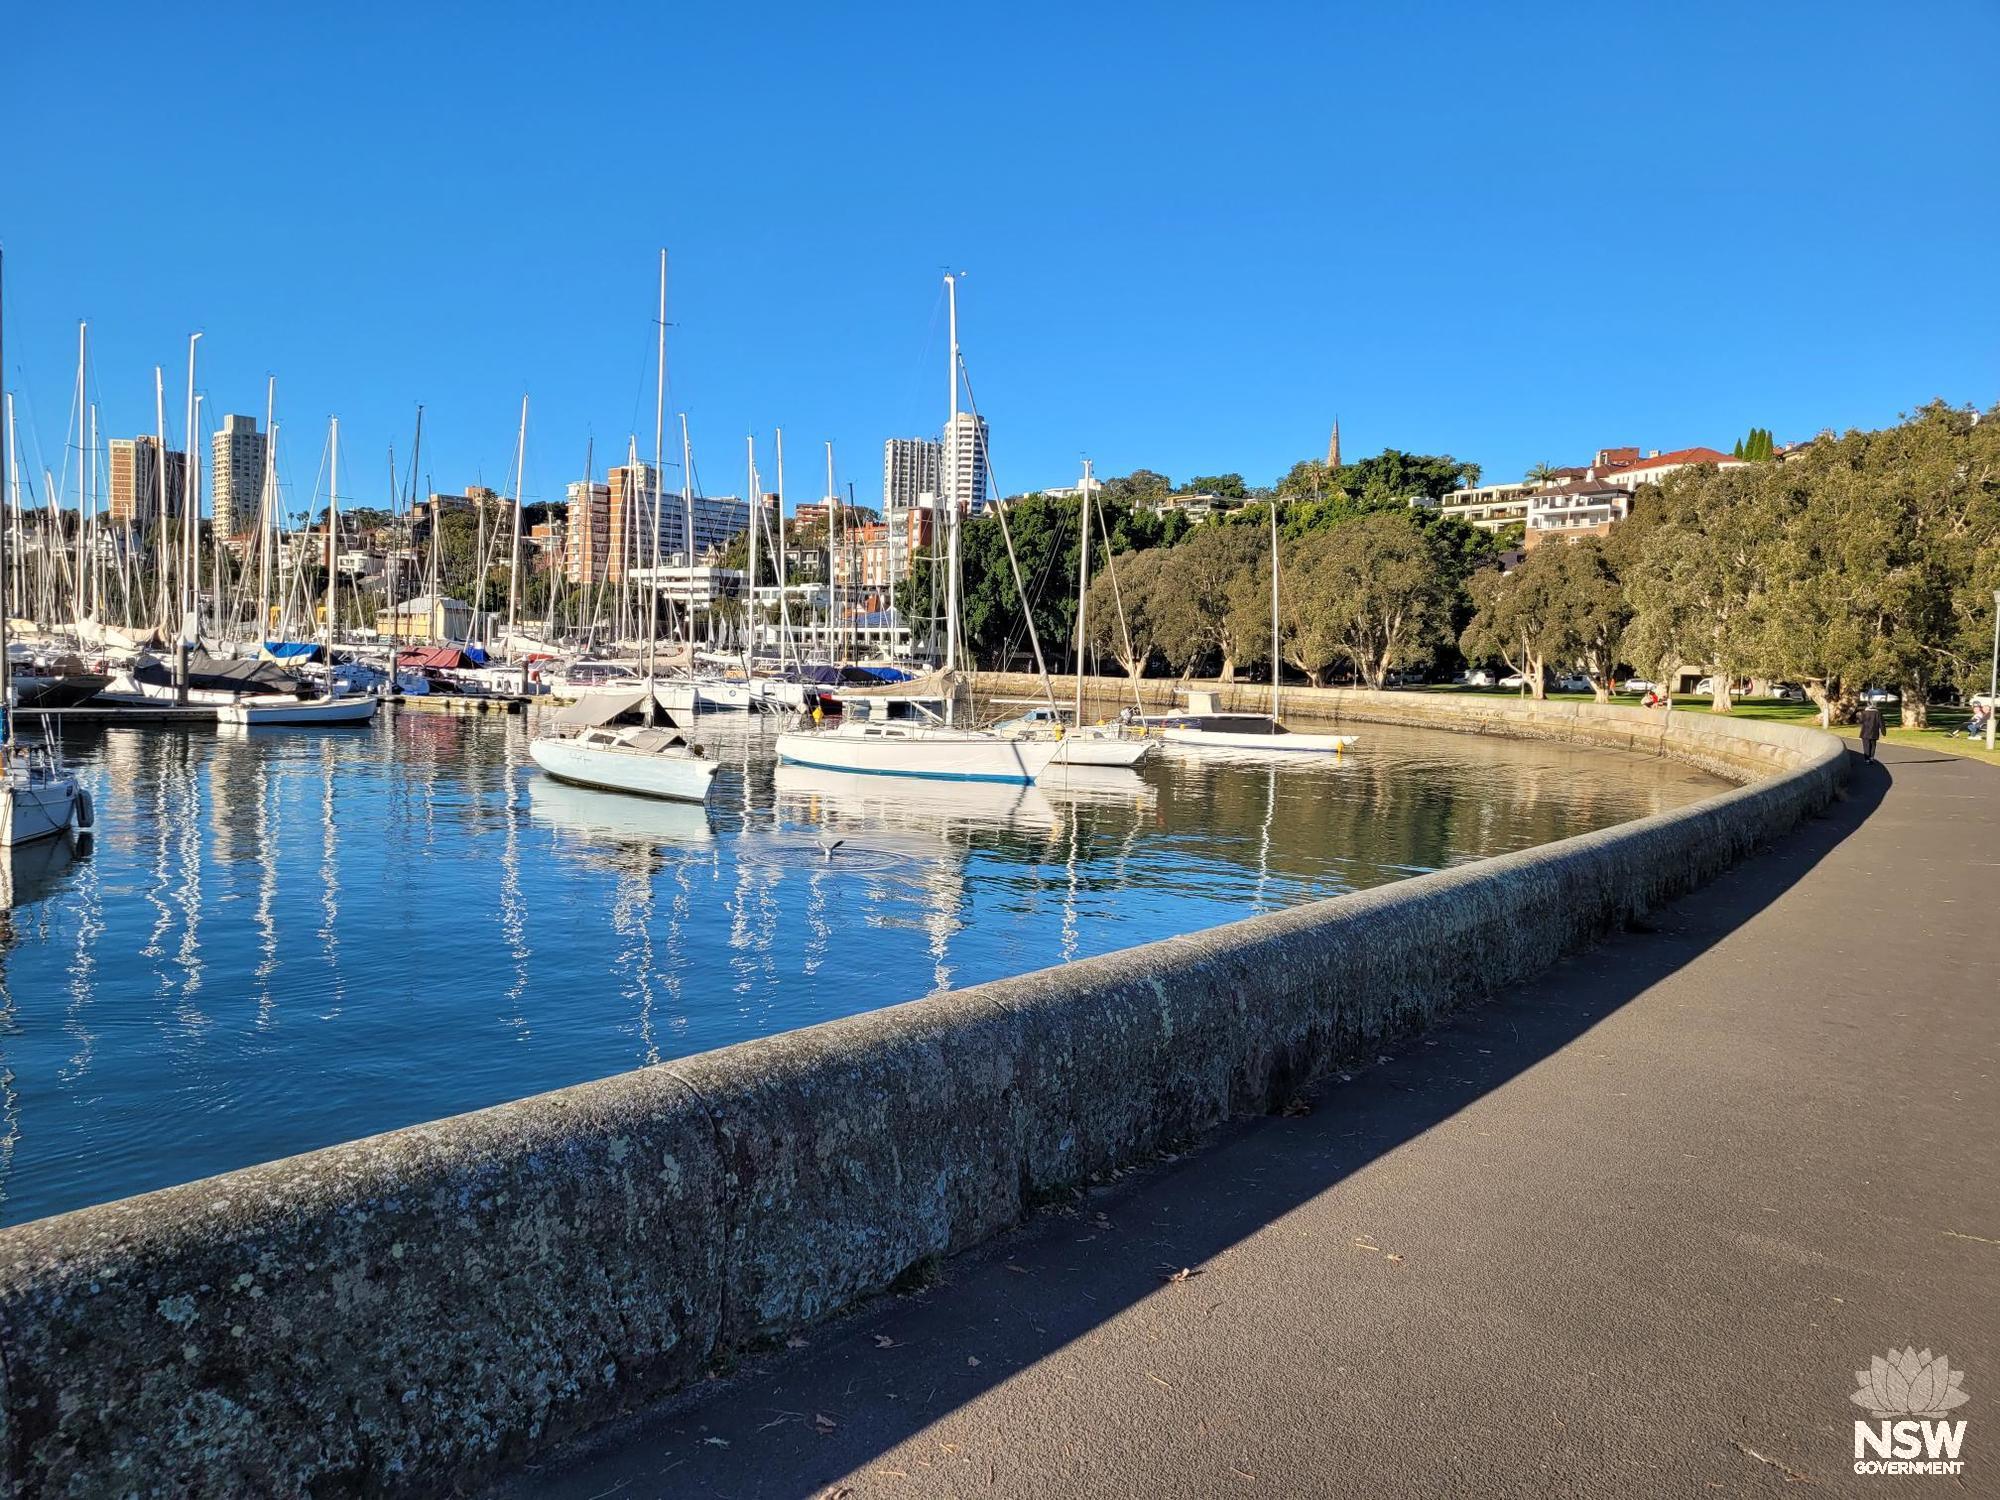 2022 6 15_Rushcutters Bay Park east_seawall and marina